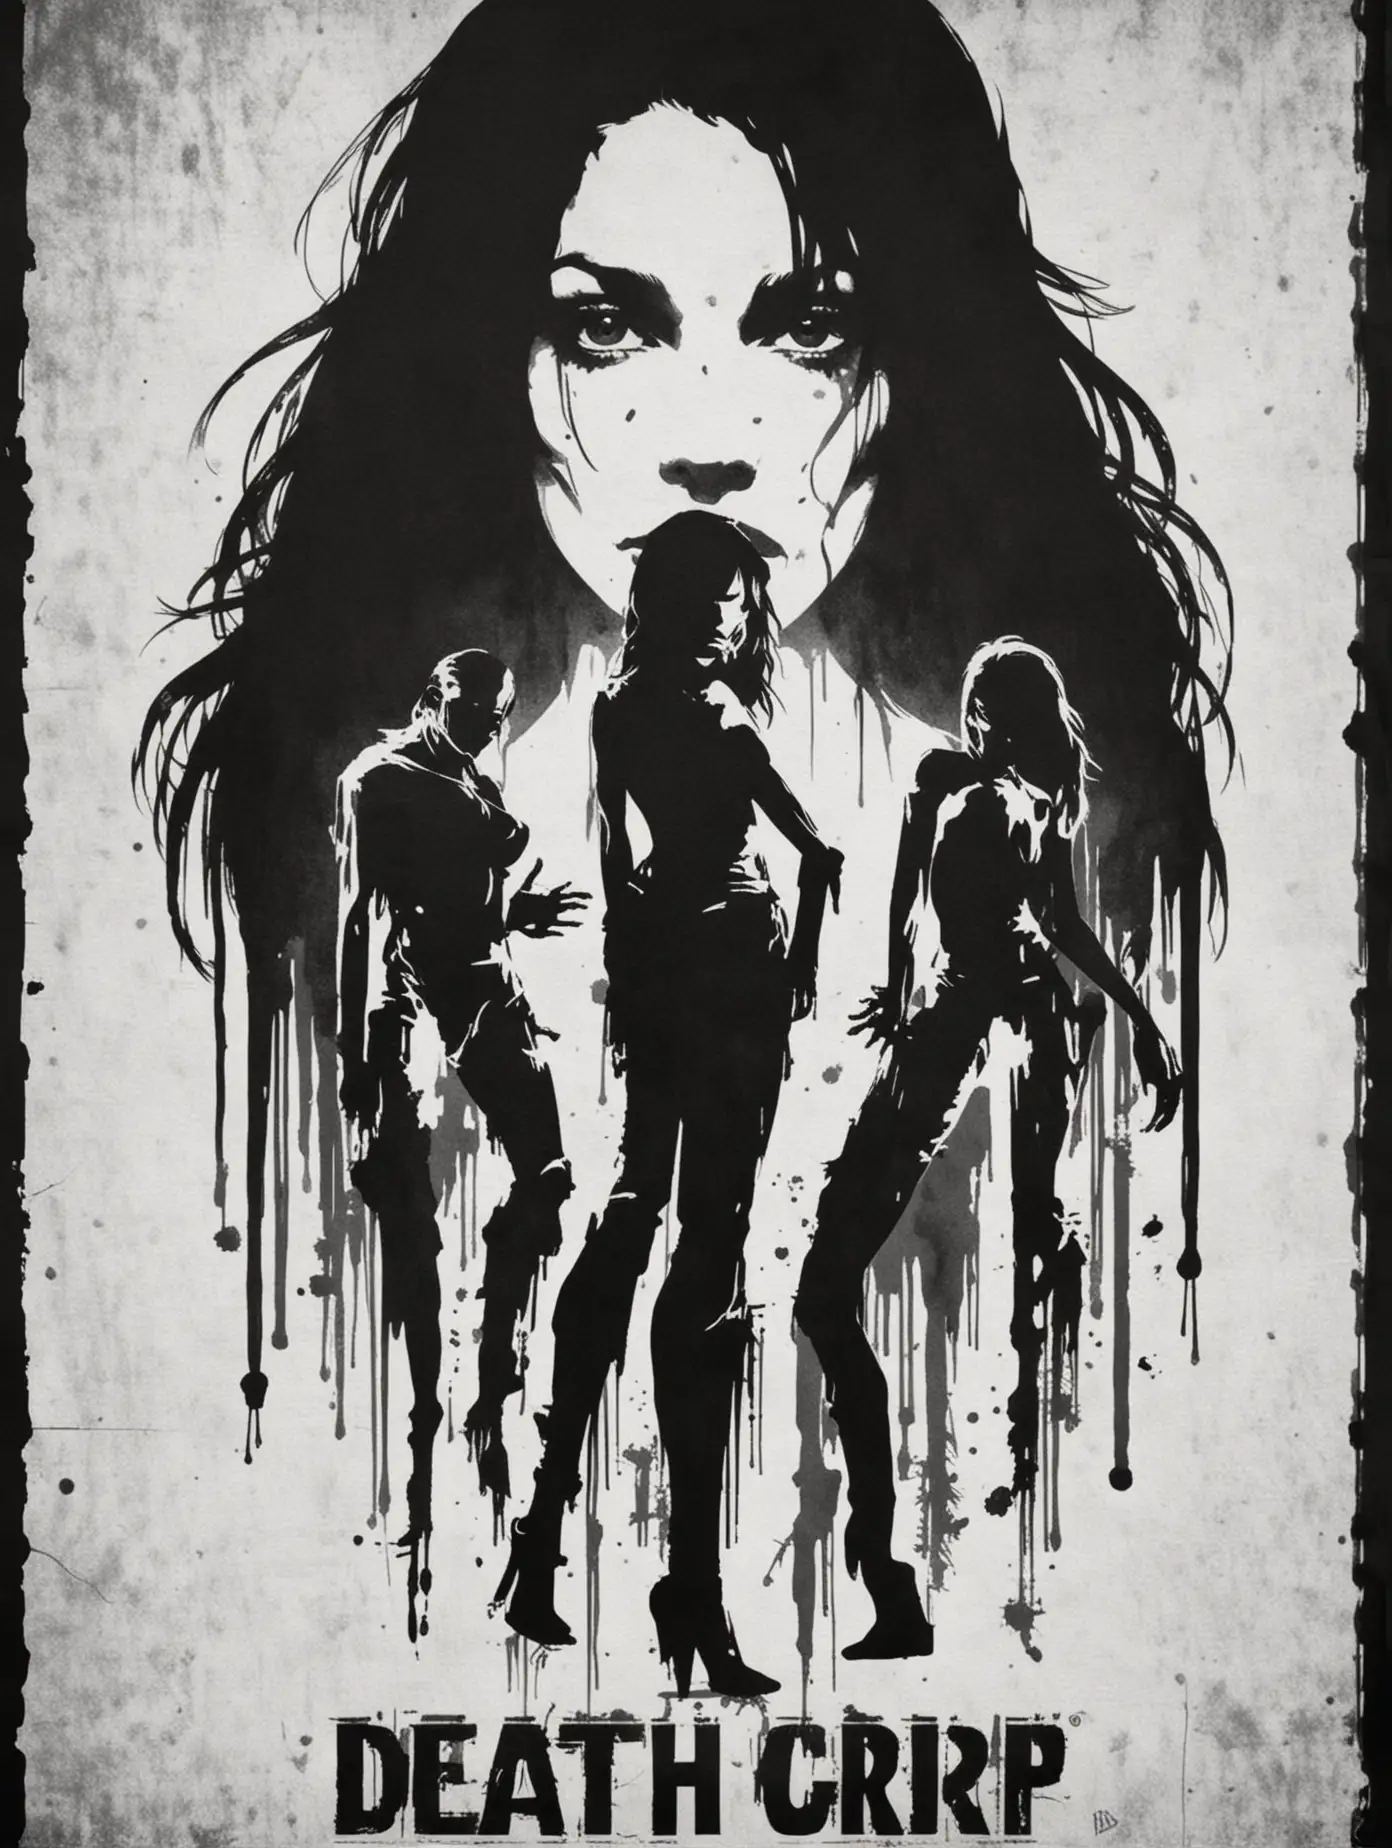 stencil, minimalist, simple, vector art, black and white, silhouette, negative space, grindhouse zombie movie poster, "Death Grip", woman